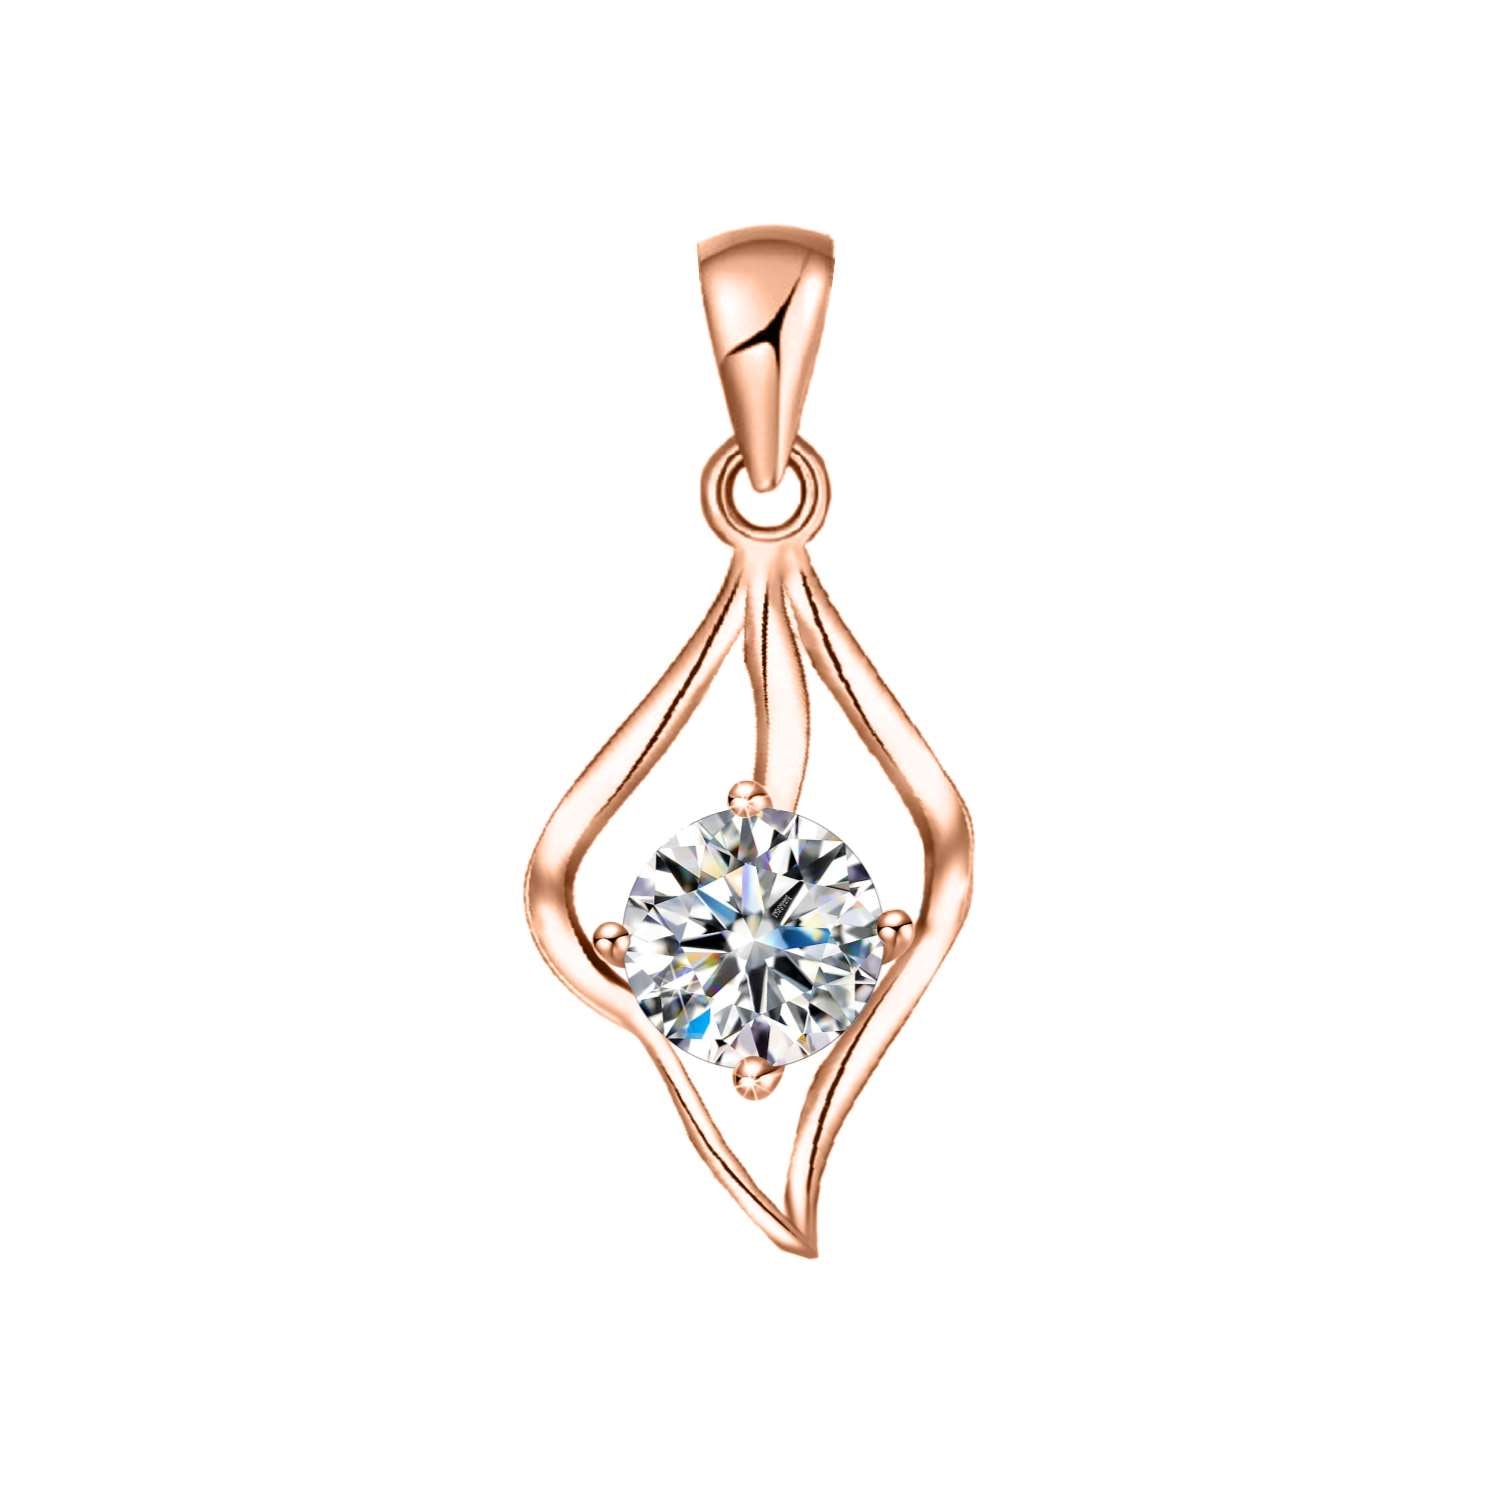 Dew Drop Solitaire Pendant in 92.5 Sterling Silver - 18k Rose Gold finish